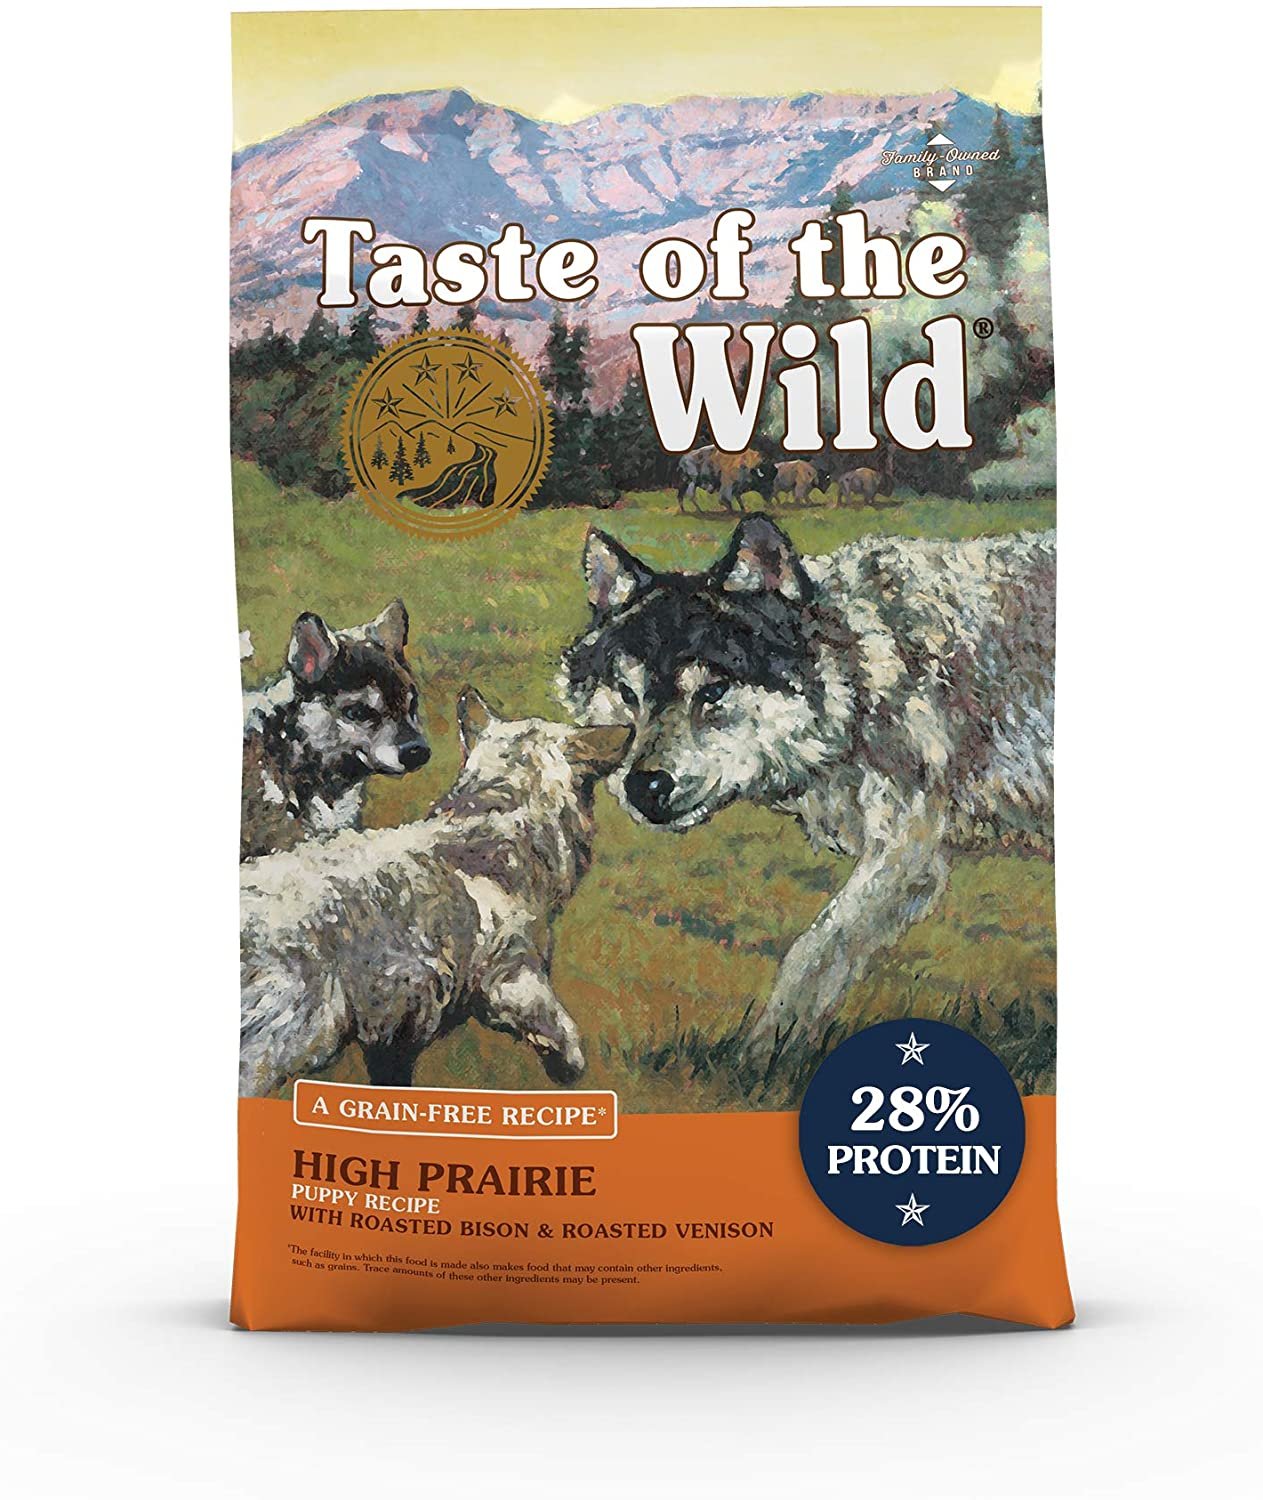 Taste of the Wild High Prairie Canine Grain-Free Recipe with Roasted Bison 